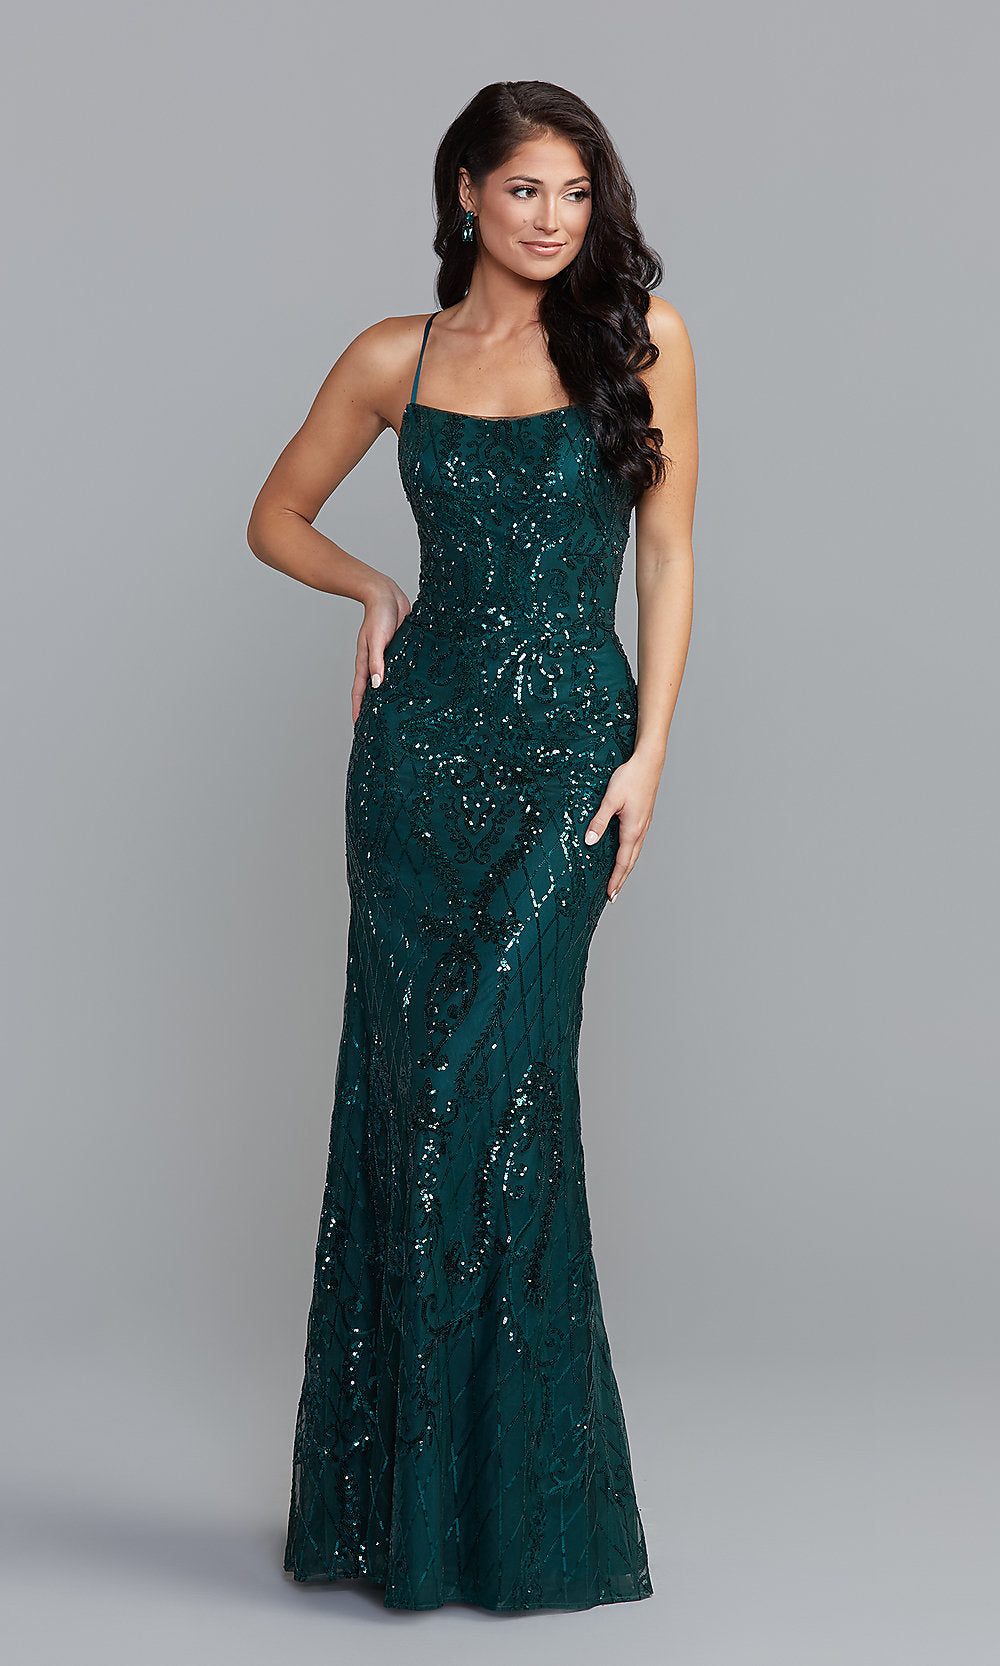 Statement-Back Long Formal Dress with Sequin Print